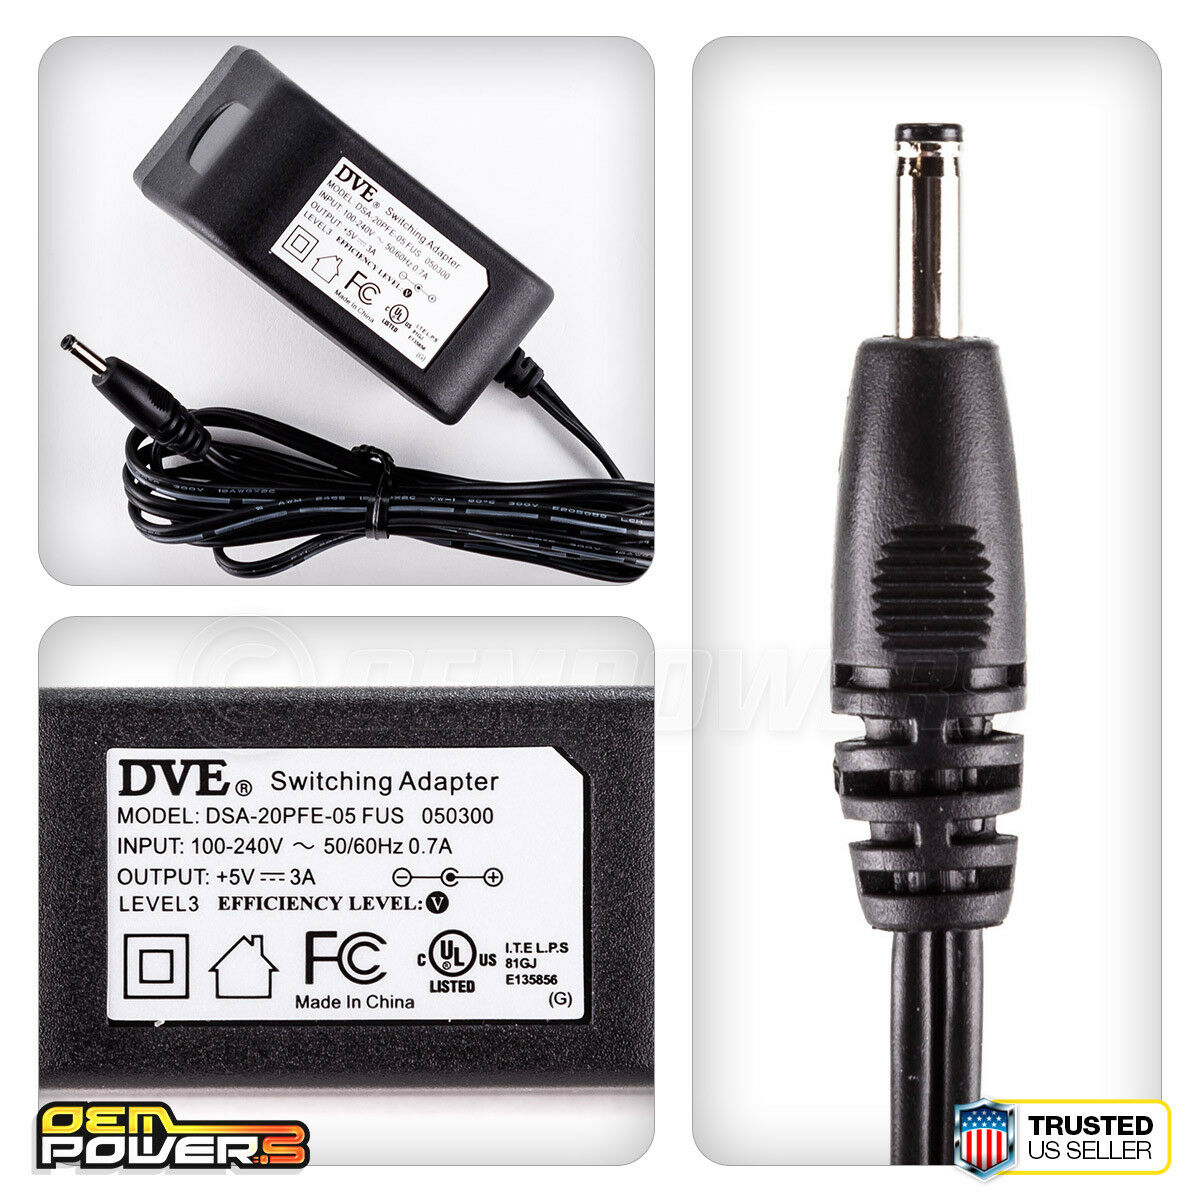 NEW GENUINE DVE DSA-20PFE-05 FUS 050300 5V 3A Switching AC Power Adapter Charger Brand: DVE Output Voltage: 5 V Ty - Click Image to Close